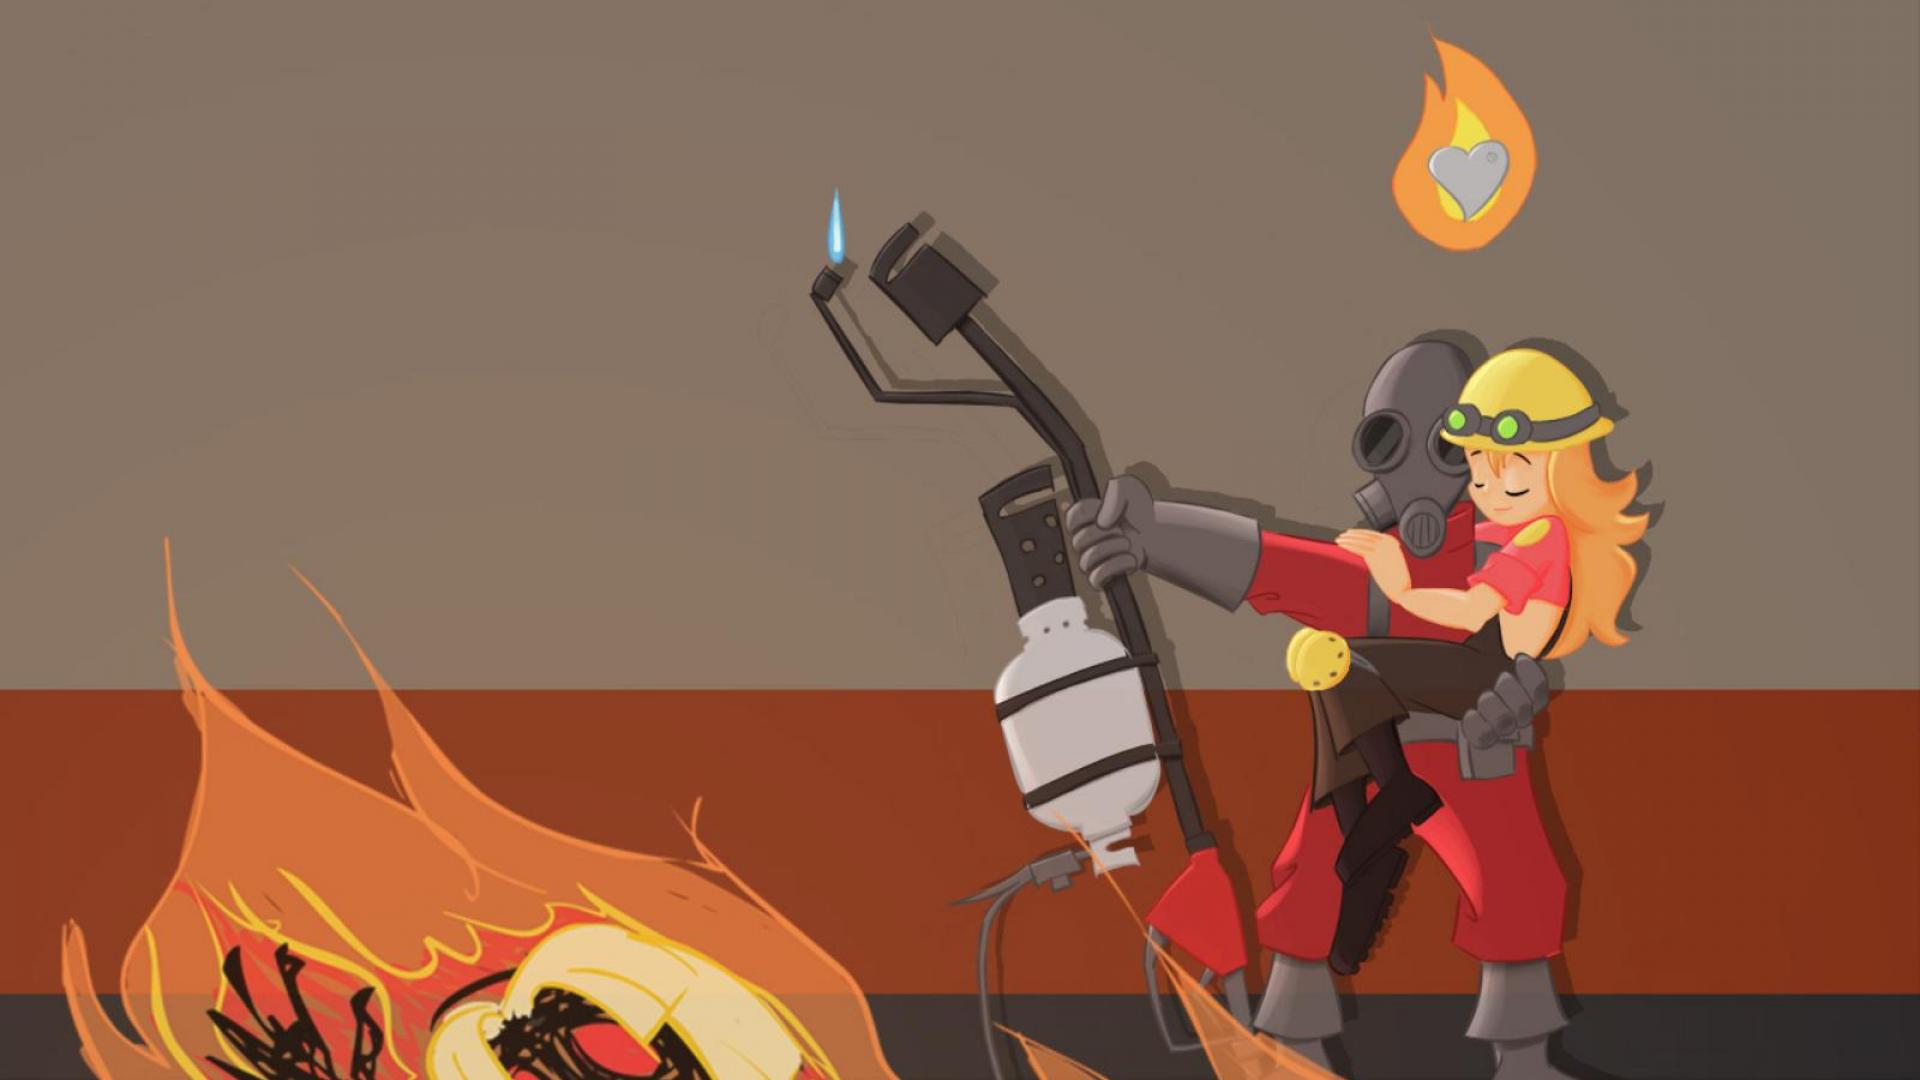 Engineer tf2 team fortress 2 wallpaper - (#176707) - High Quality ...